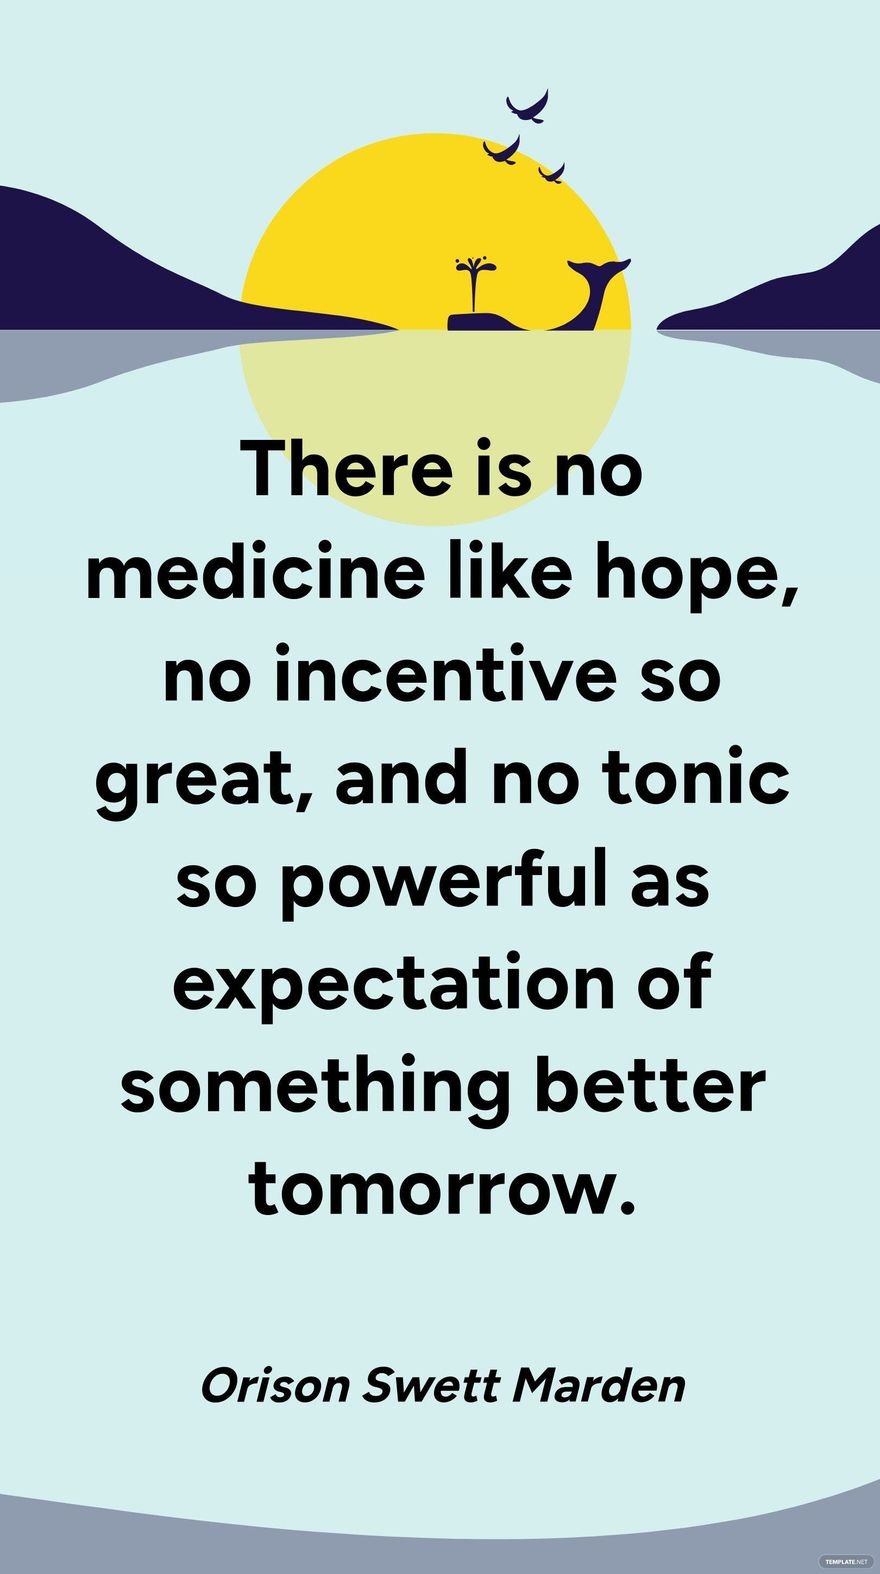 Orison Swett Marden - There is no medicine like hope, no incentive so great, and no tonic so powerful as expectation of something better tomorrow.